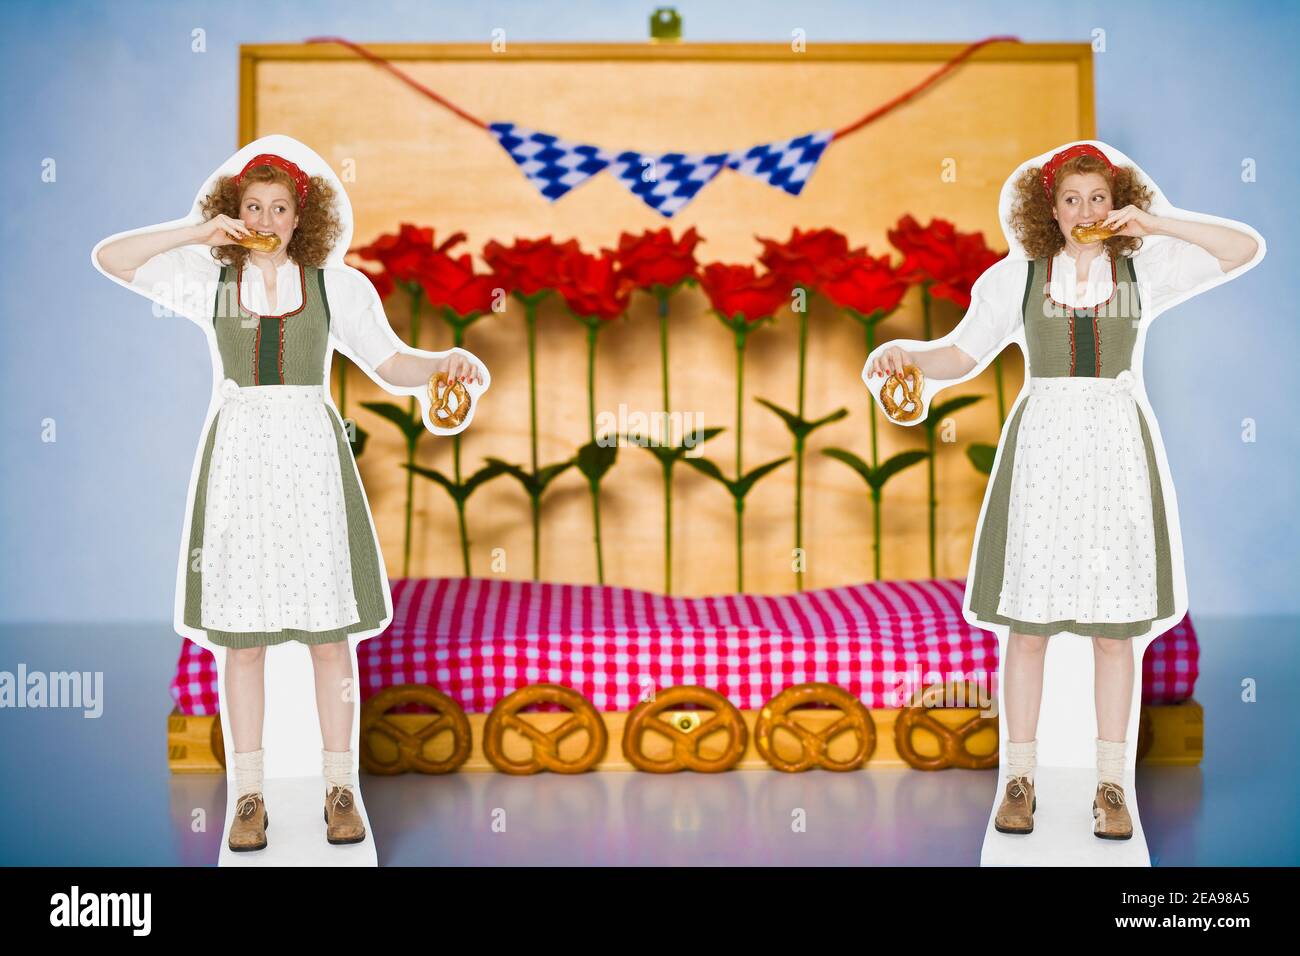 Still-life photo, 2 women in dirndls, with pretzels in their hands, biting into a pretzel, standing in front of a wooden decoration, with pretzels, Bavarian flags, plastic roses, checkered blanket, bluish background Stock Photo